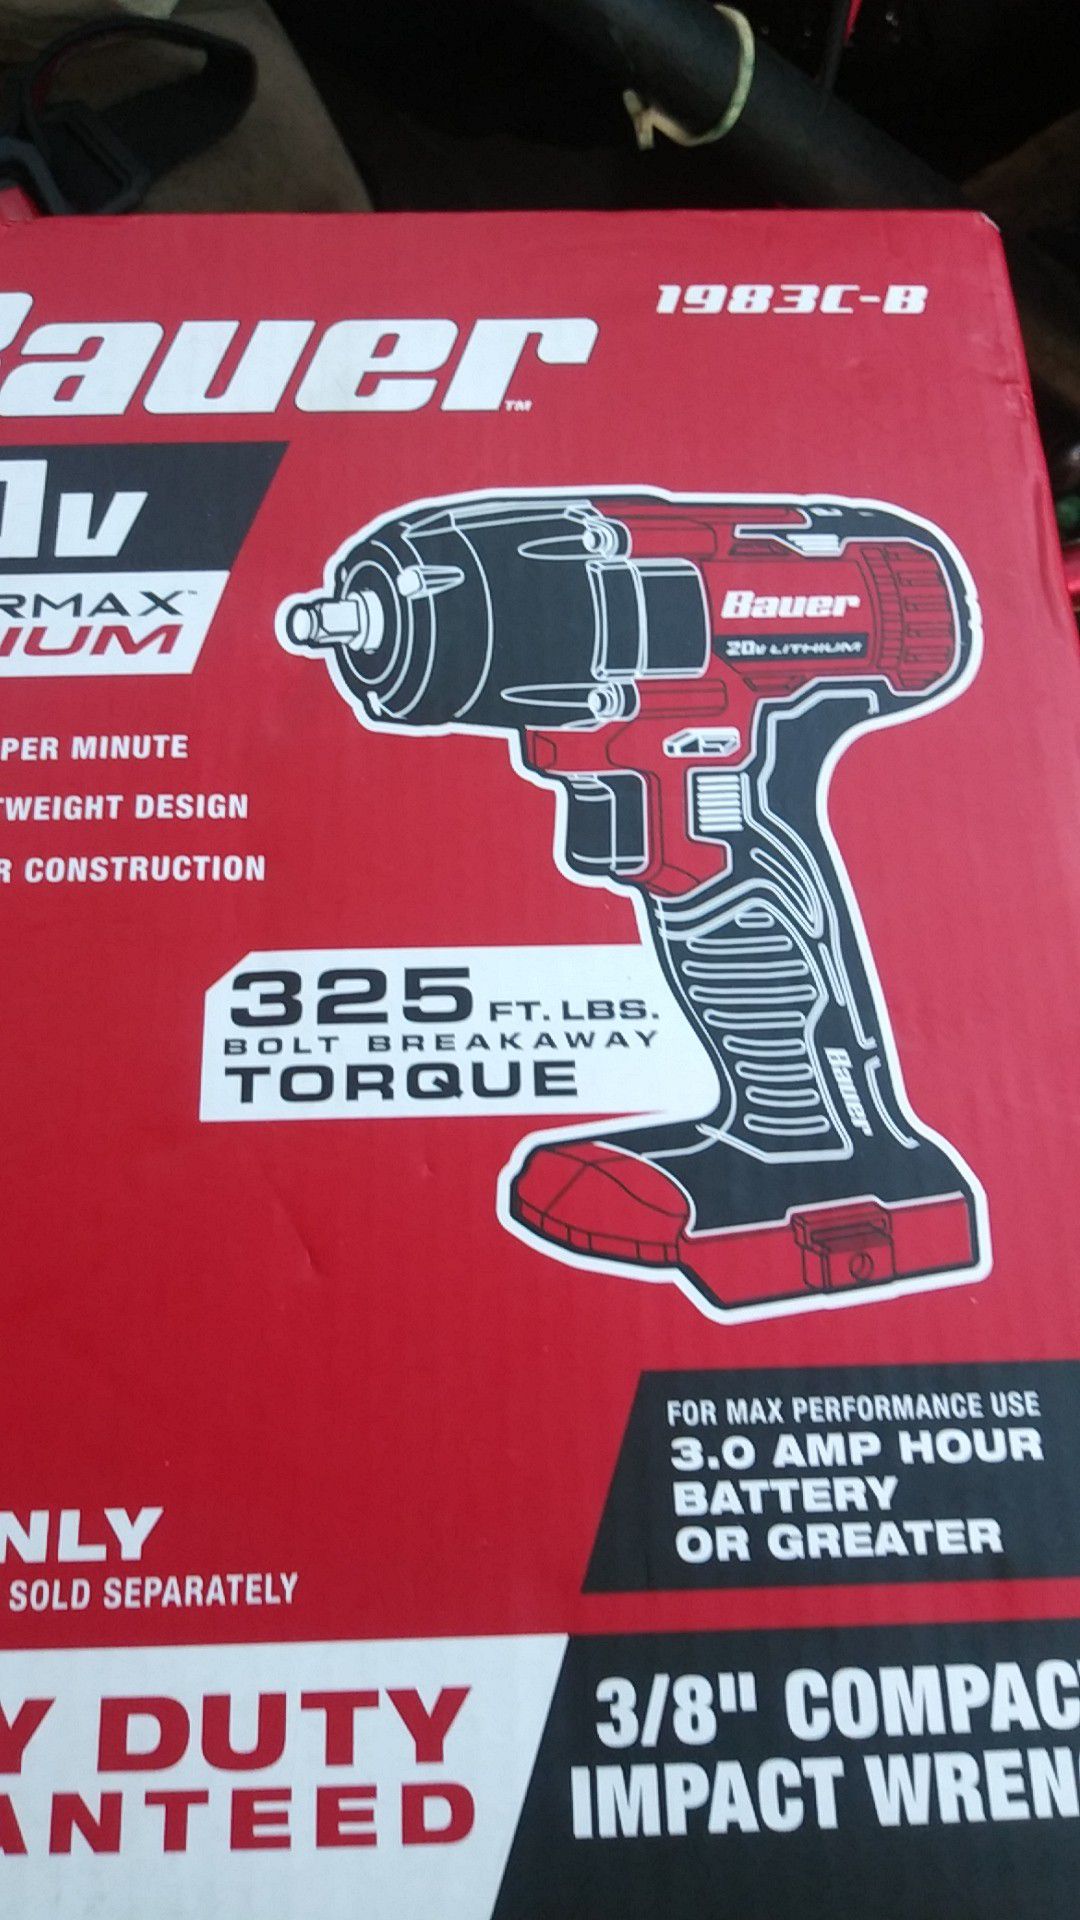 Bauer 20 v hypermax 3/8' compact impact wrench (tool only)